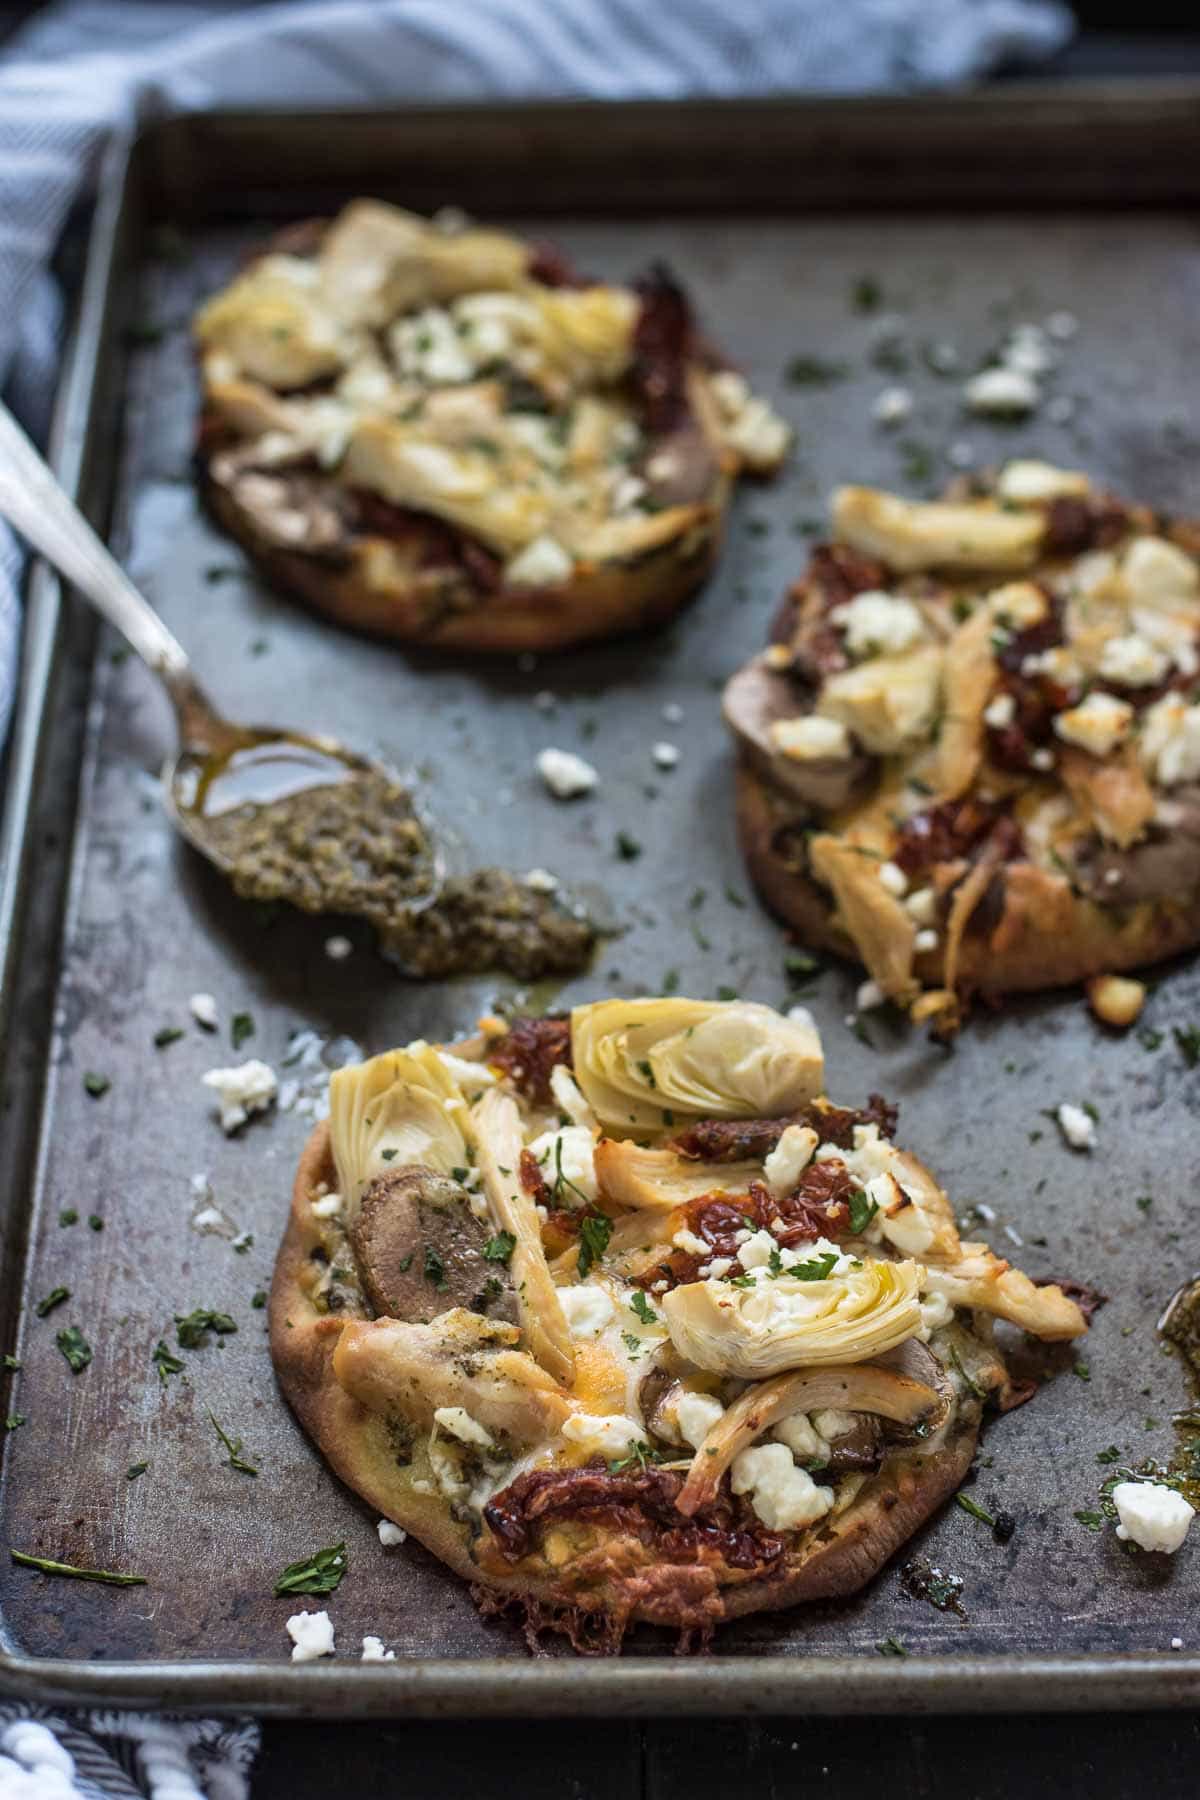 These mini pizzas loaded with feta, chicken, sundried tomatoes, and artichoke make a quick and easy weeknight meal.